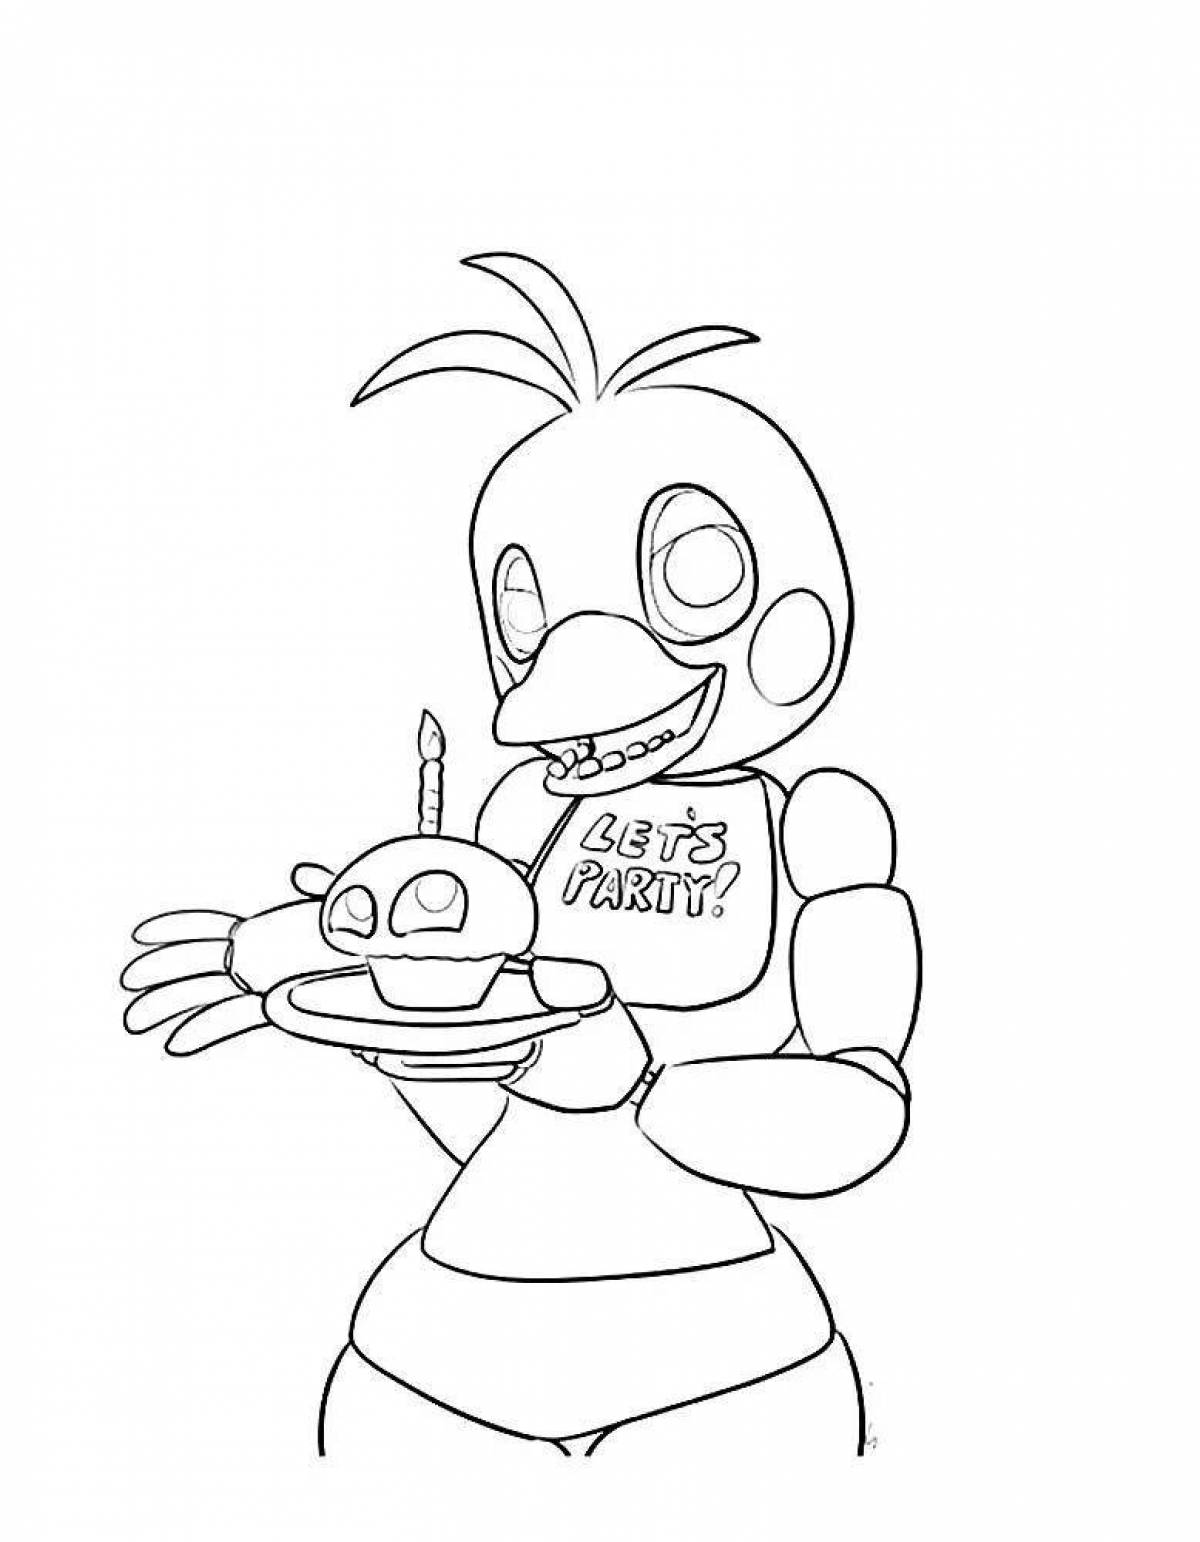 Sunny toy chica coloring page